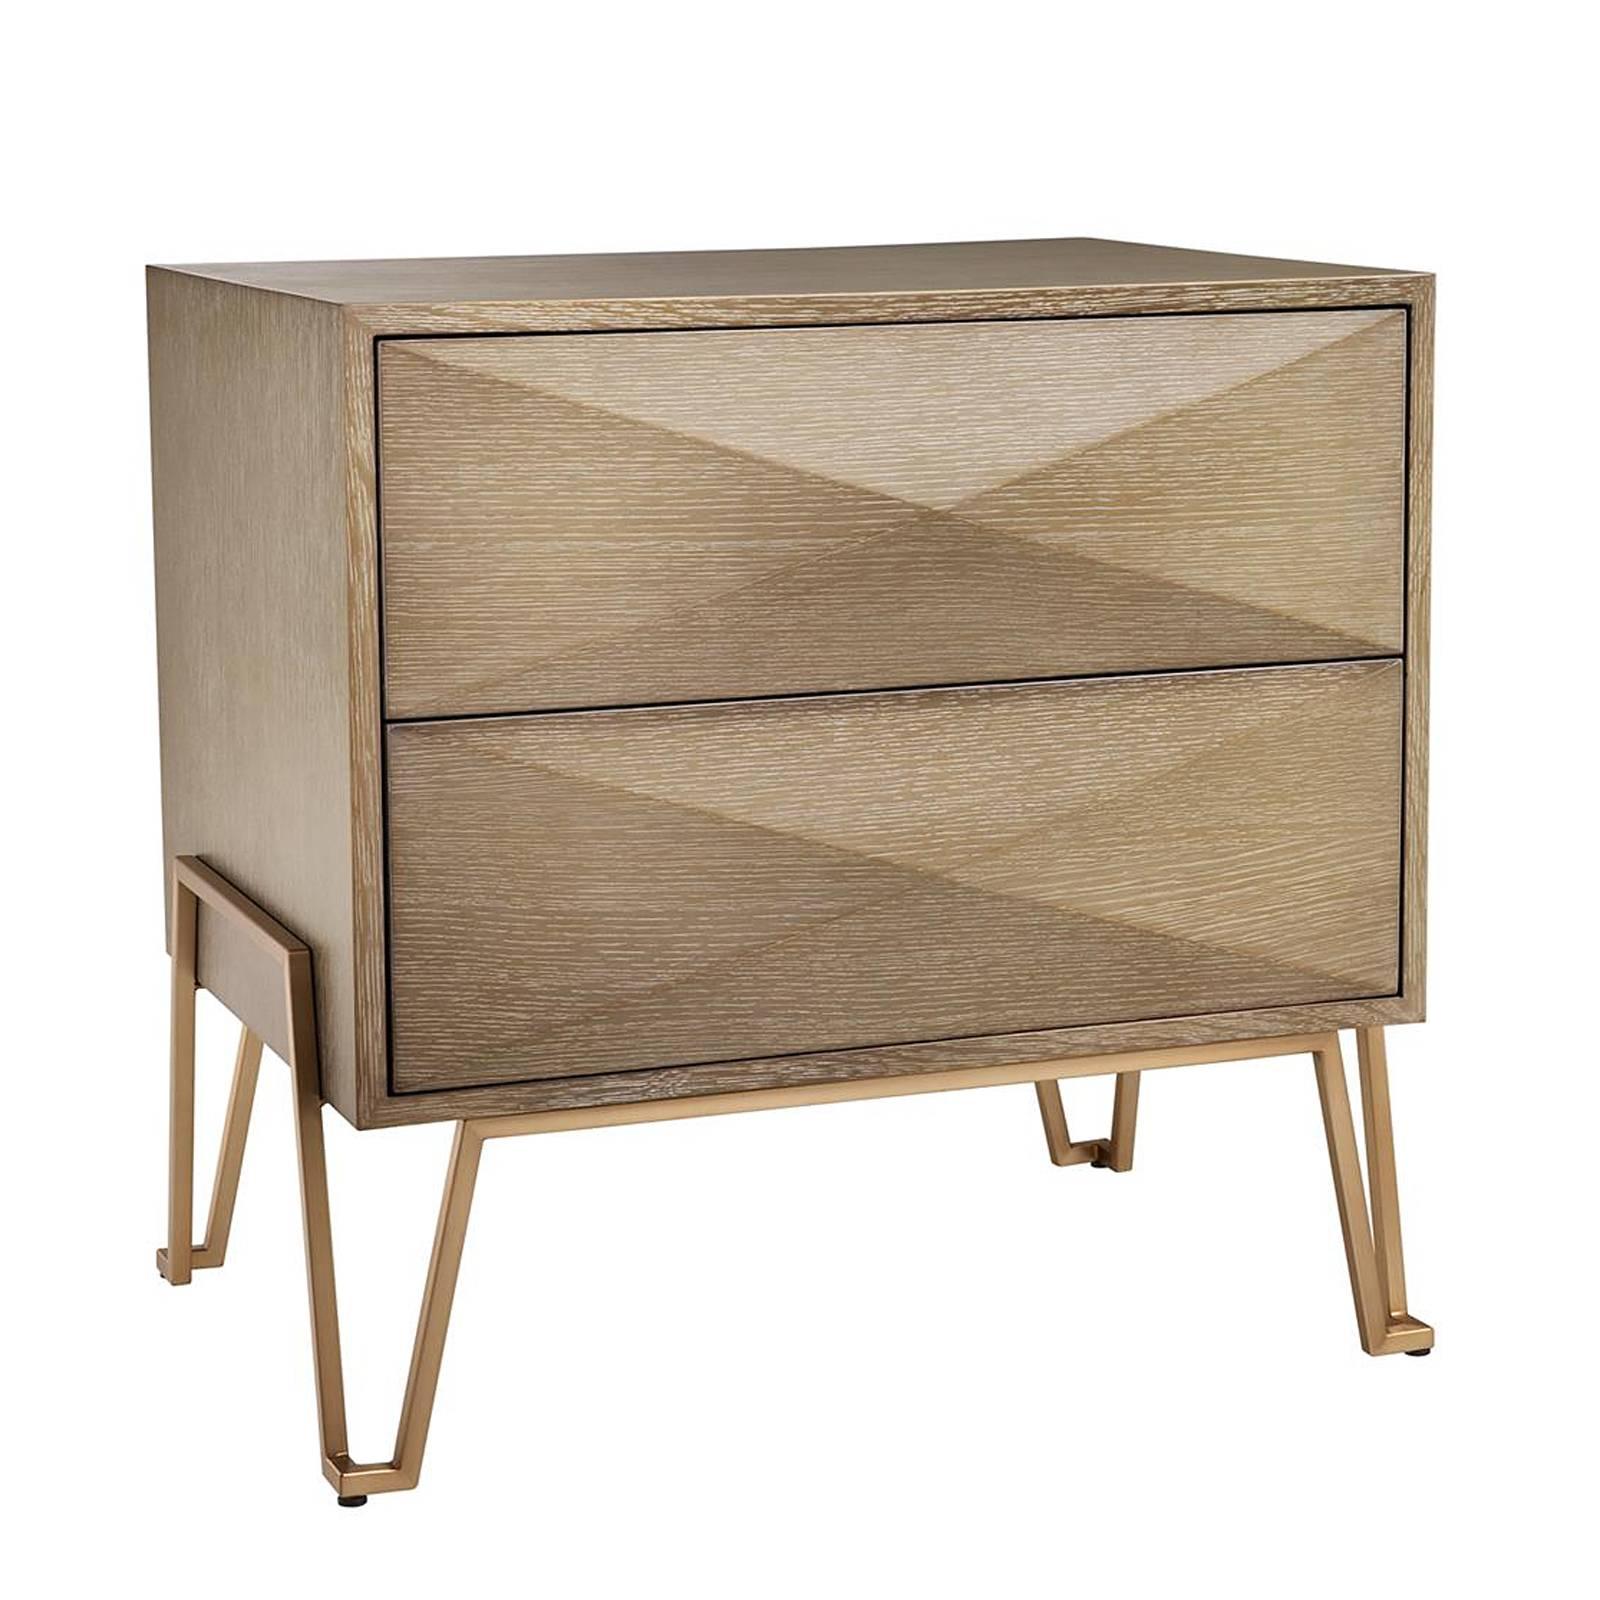 Side table or nightstand catalaga with a washed 
oak veneer top and with brushed brass base.
With two drawers. Also available in round table,
sideboard, bar, desk or dining table catalaga. 